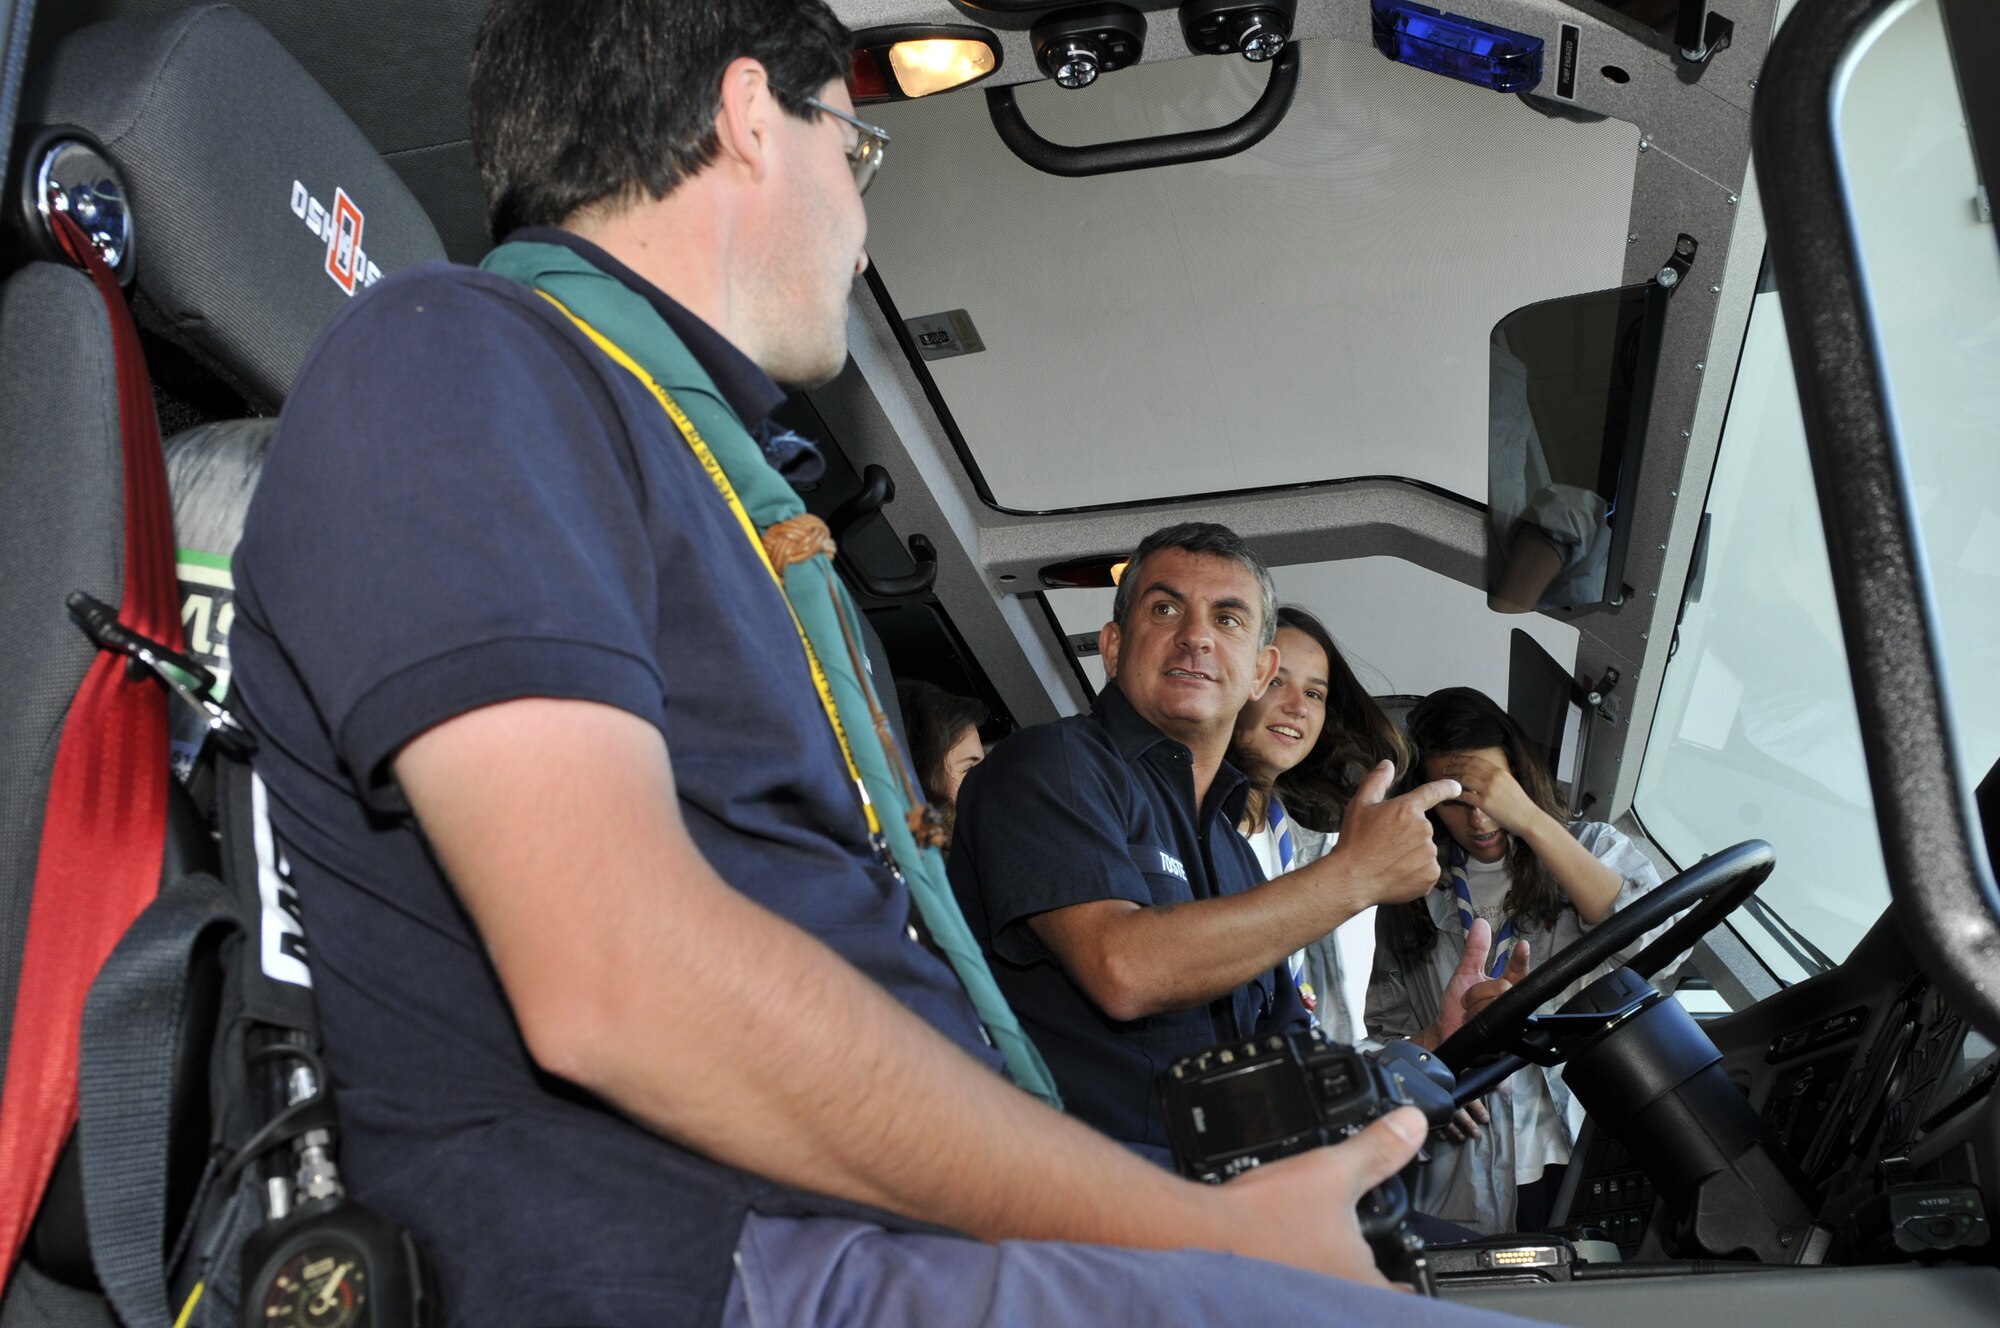 Valdemar Toste, a 65th Civil Engineer Squadron’s truck driver, explains the functions of a Striker 3000 truck to a combined Boy and Girls Scout troop from Lisbon during a visit to Lajes Field, Azores, Aug. 2. (U.S. Air Force photo/Staff Sgt. Olufemi Owolabi)